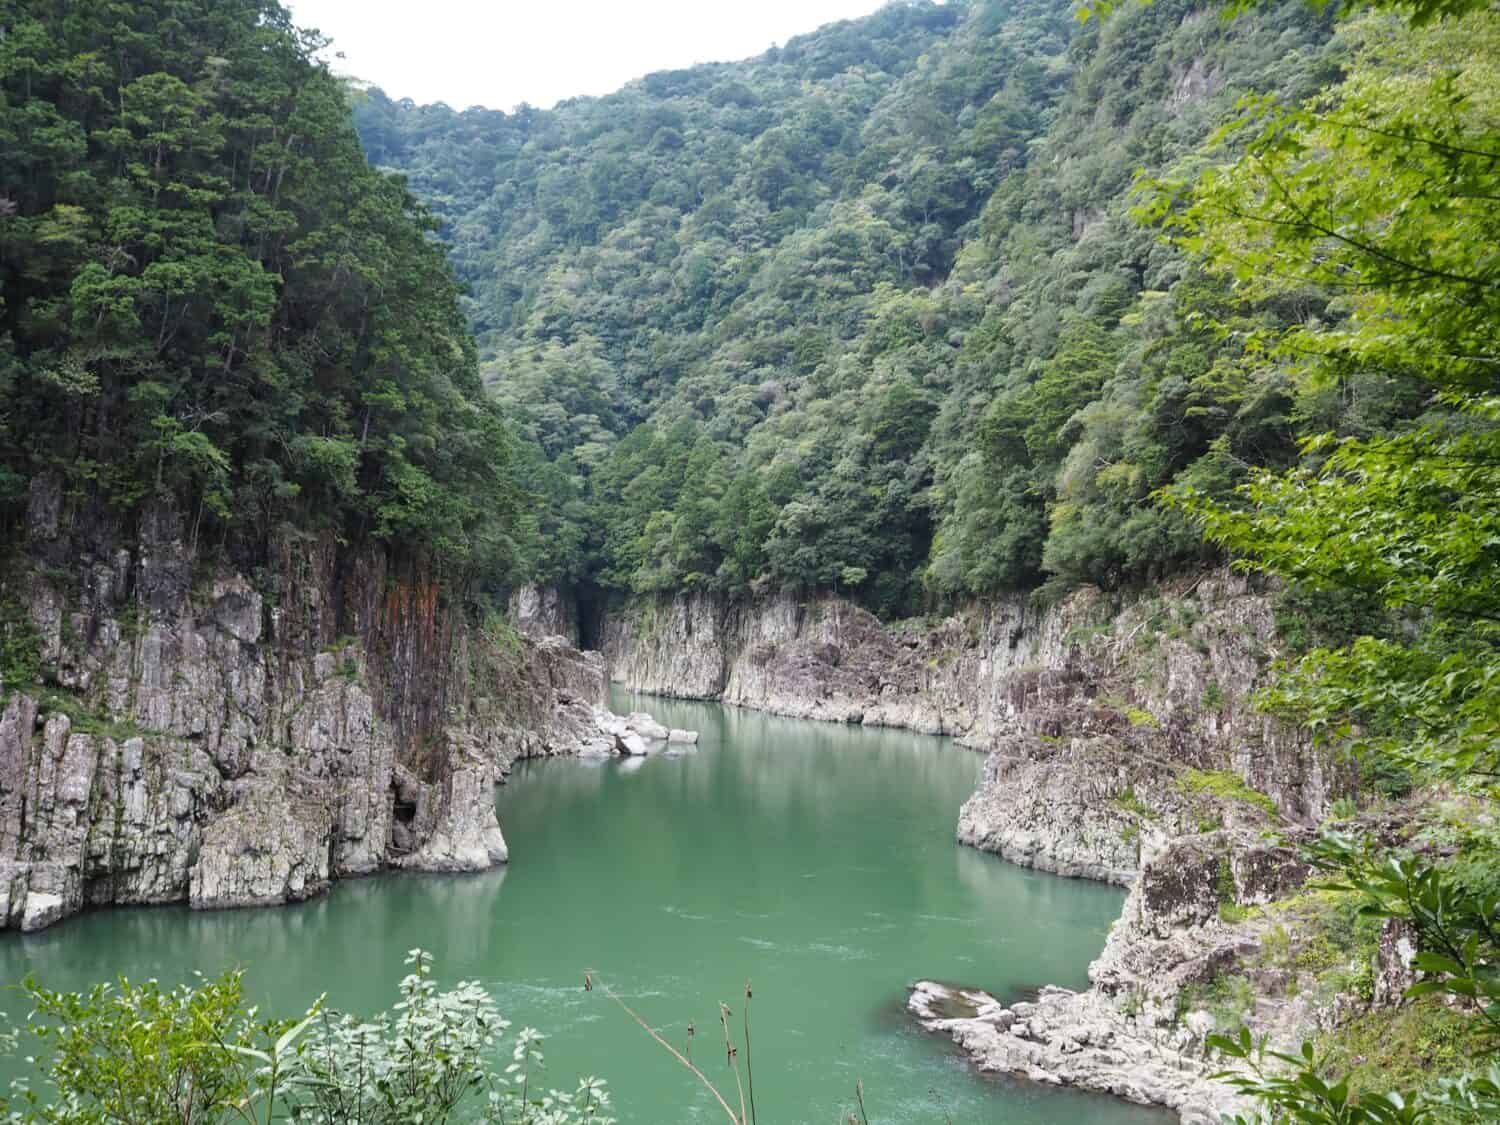 View of beautiful valley with green river water and steep cliffs (Dorokyo Gorge, Kumano River, Japan)